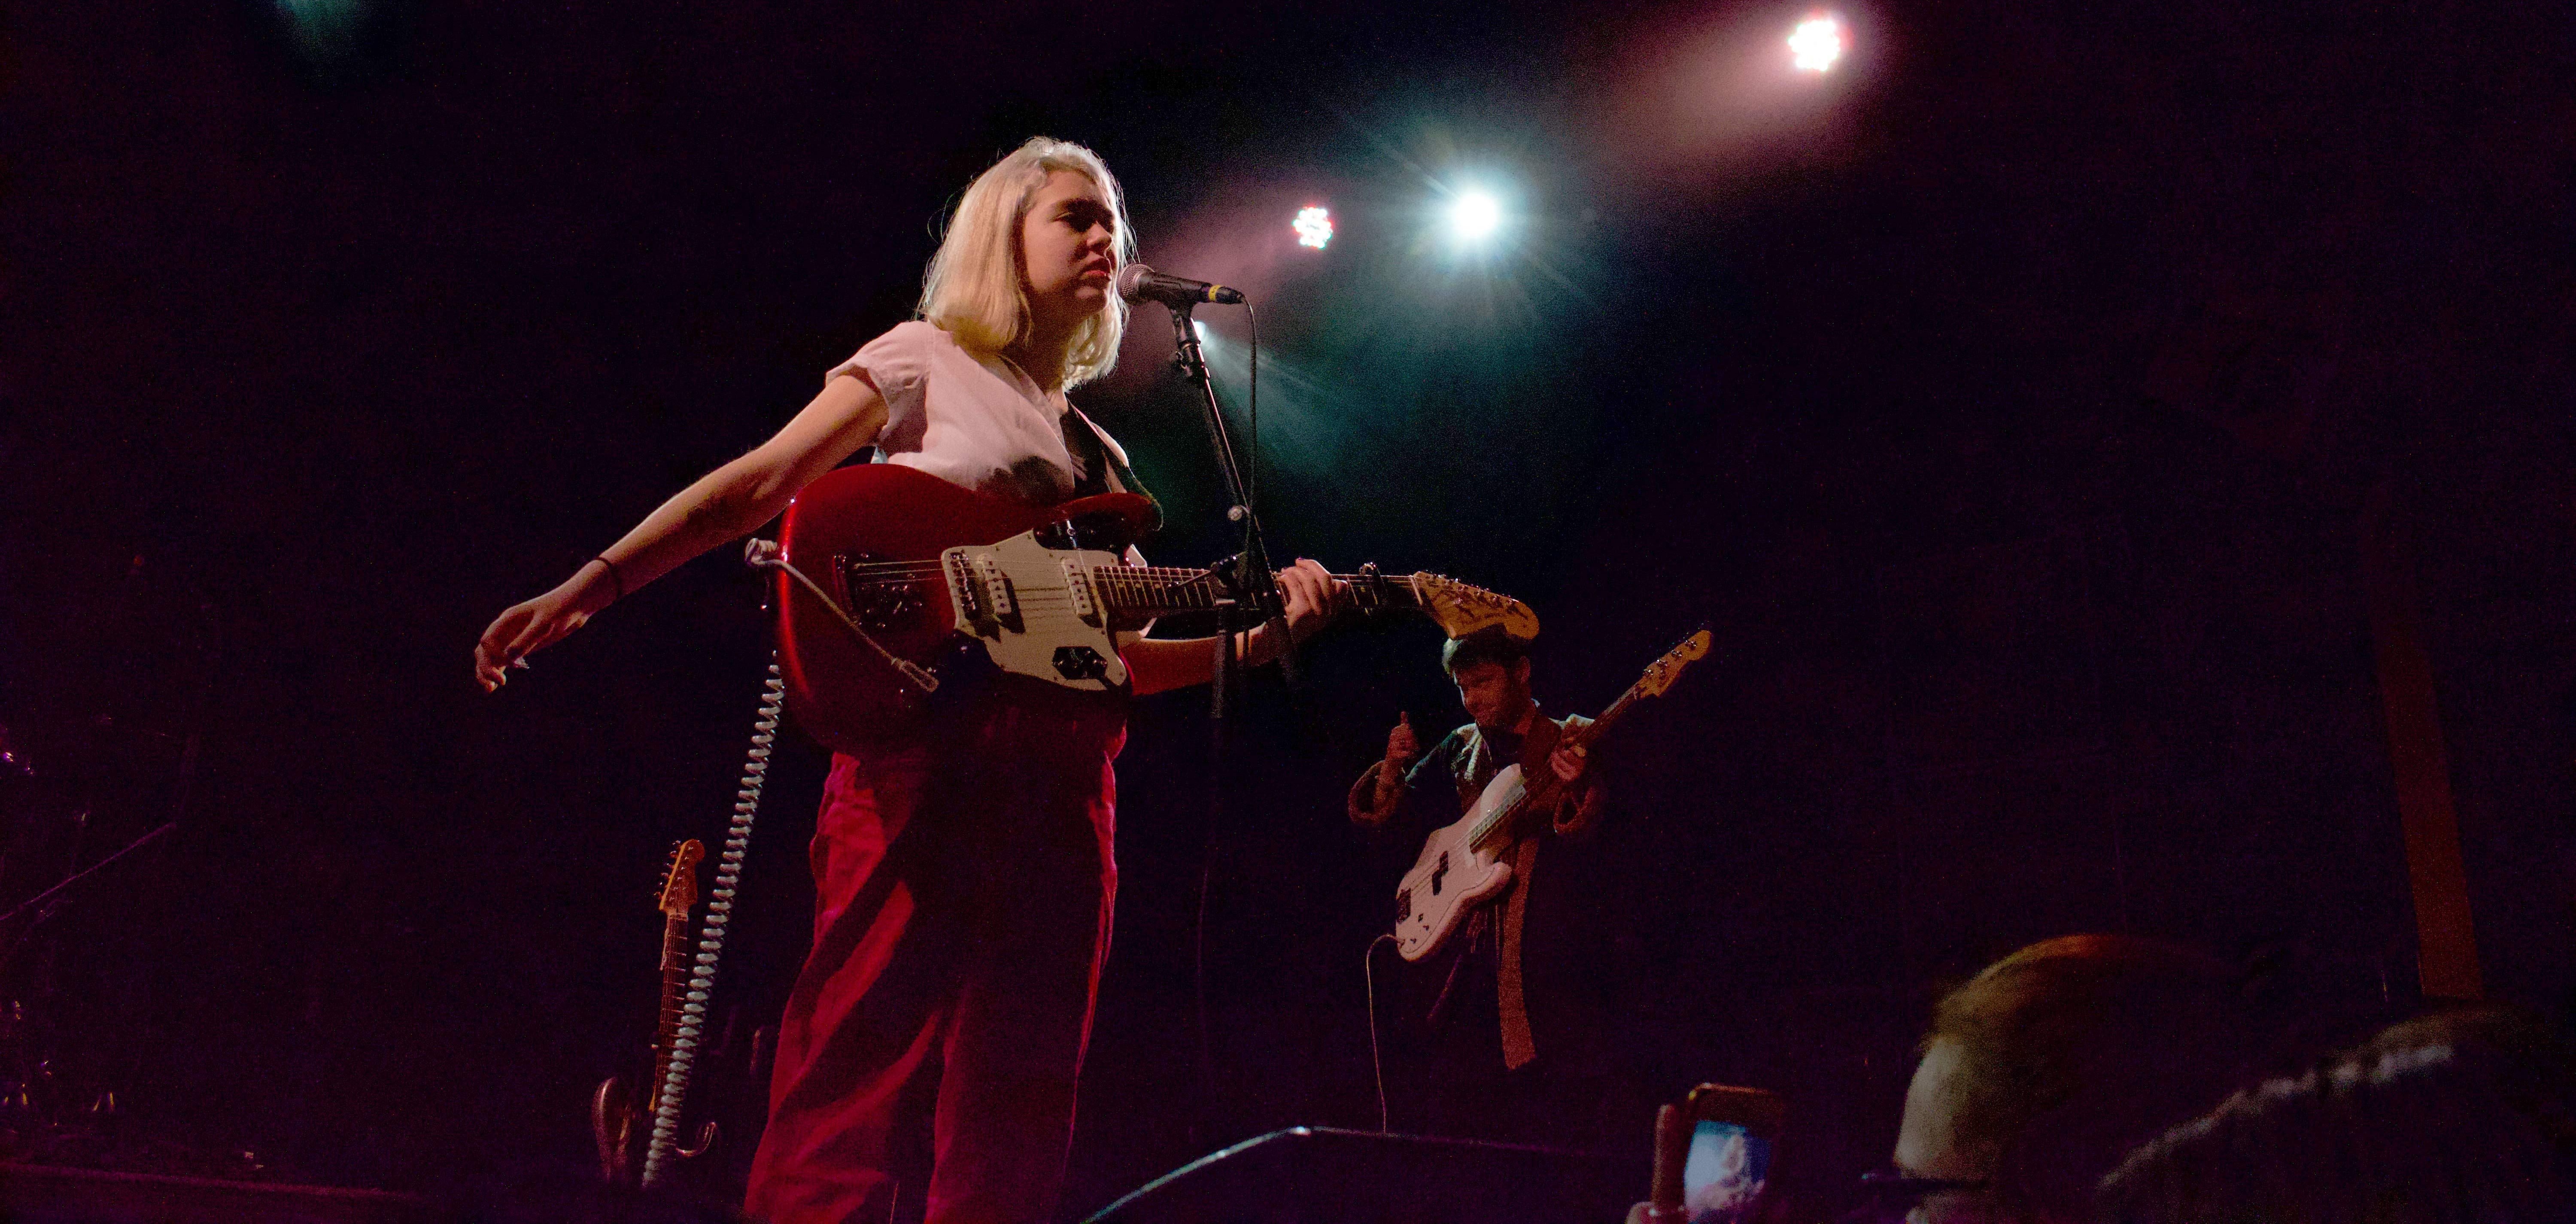 Snail Mail brings summer back to the Sinclair